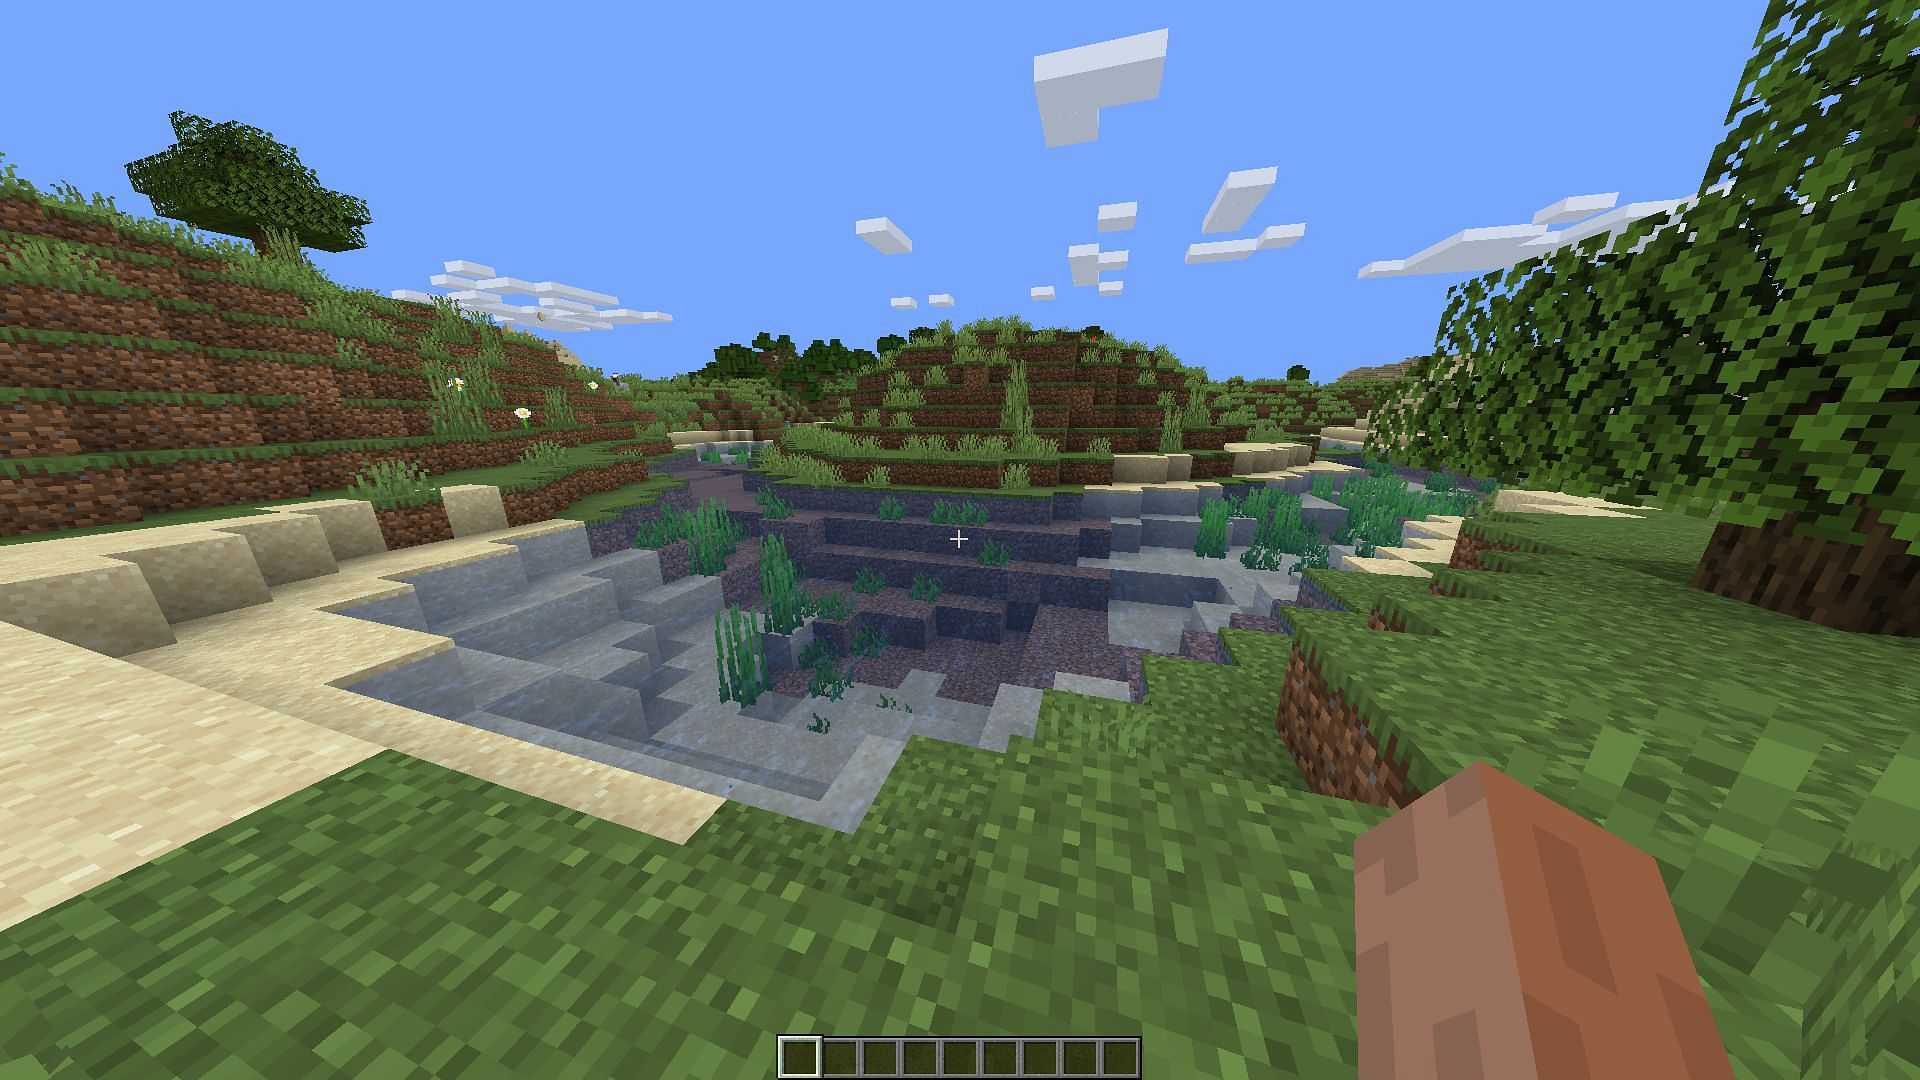 Water Improved texture pack solely focuses on making water look more realistic in the game (Image via CurseForge)